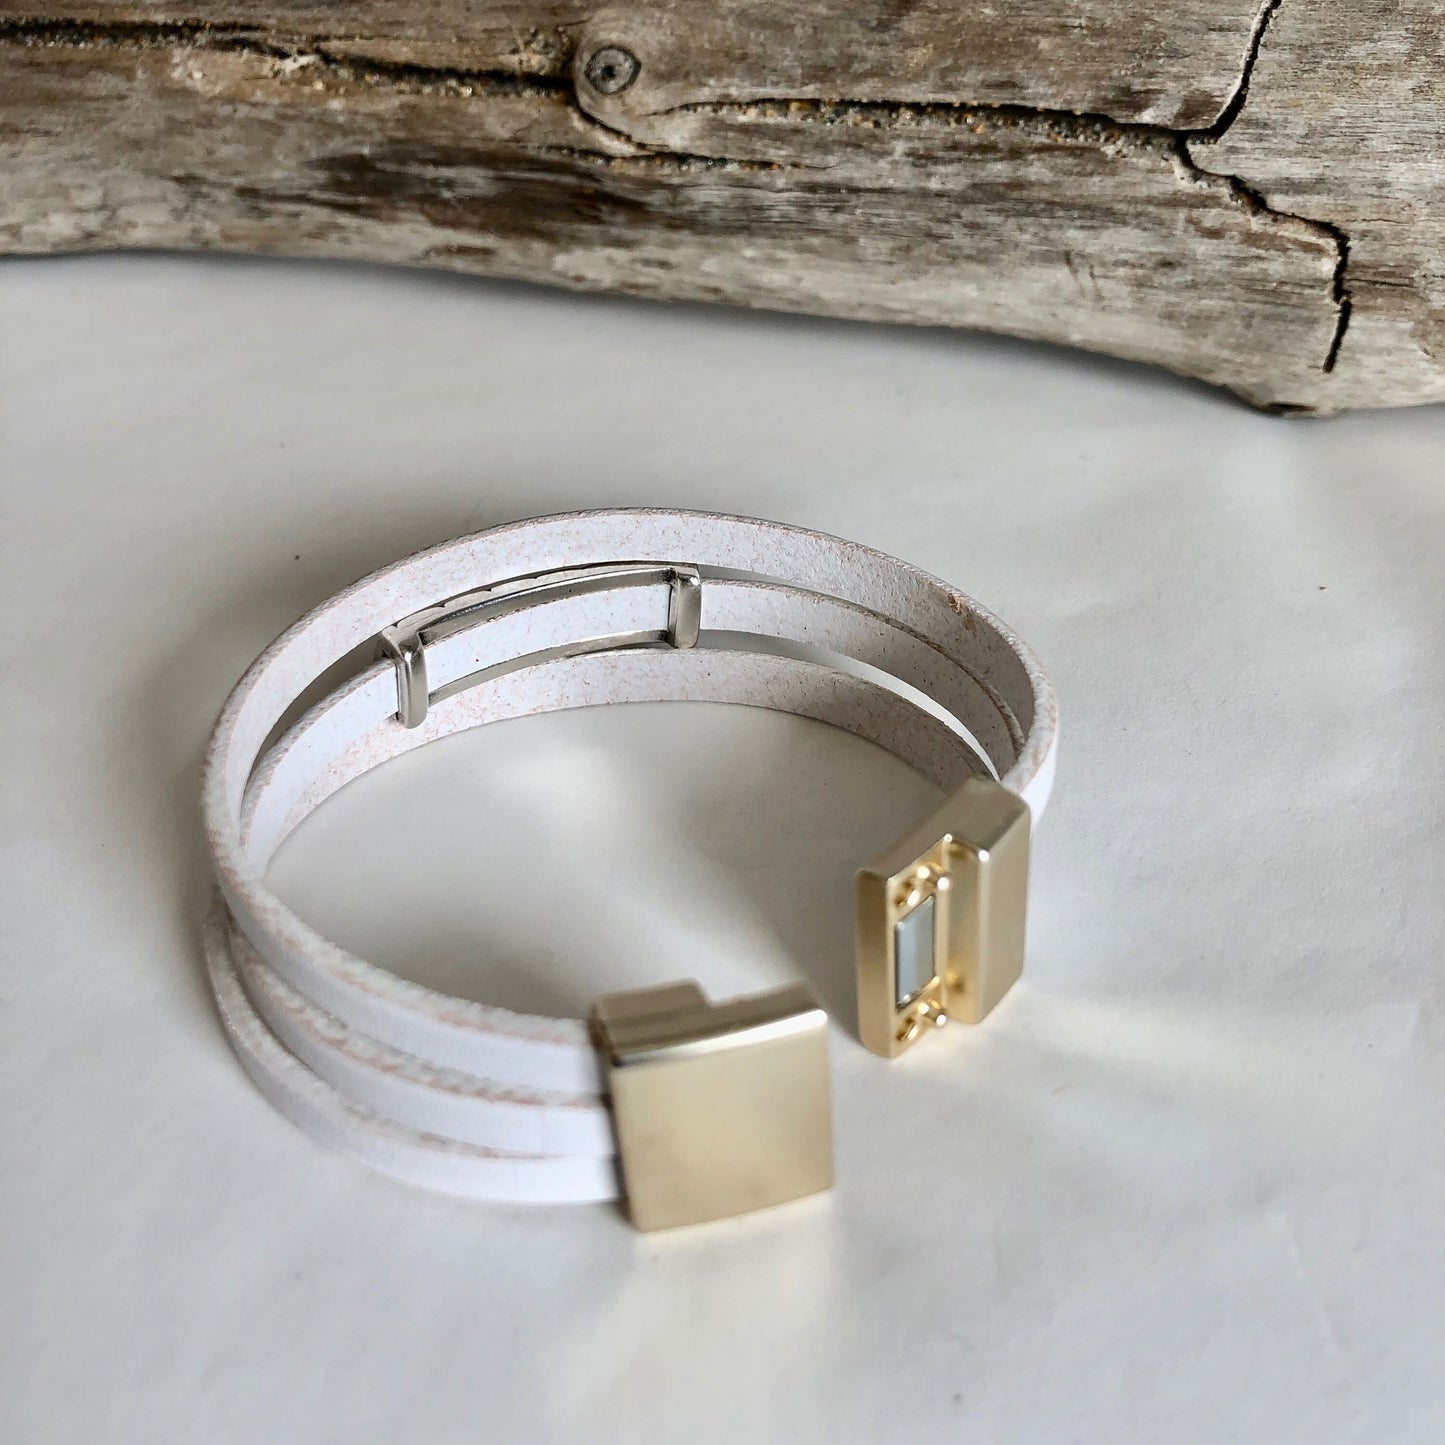 Leather bracelet, made of fine white three wrapped Italian leather, a beautiful silver slide, and finished with a quality bronze magnetic clasp.